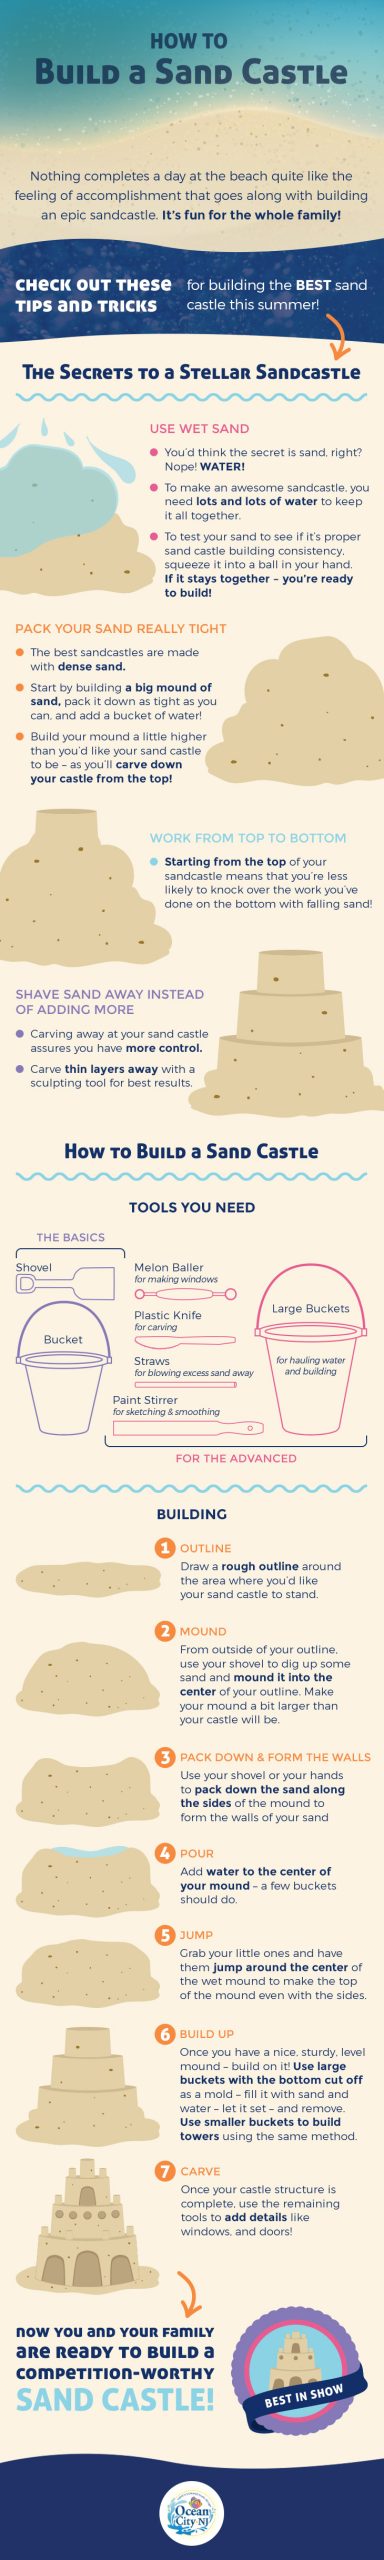 how to build a sand castle